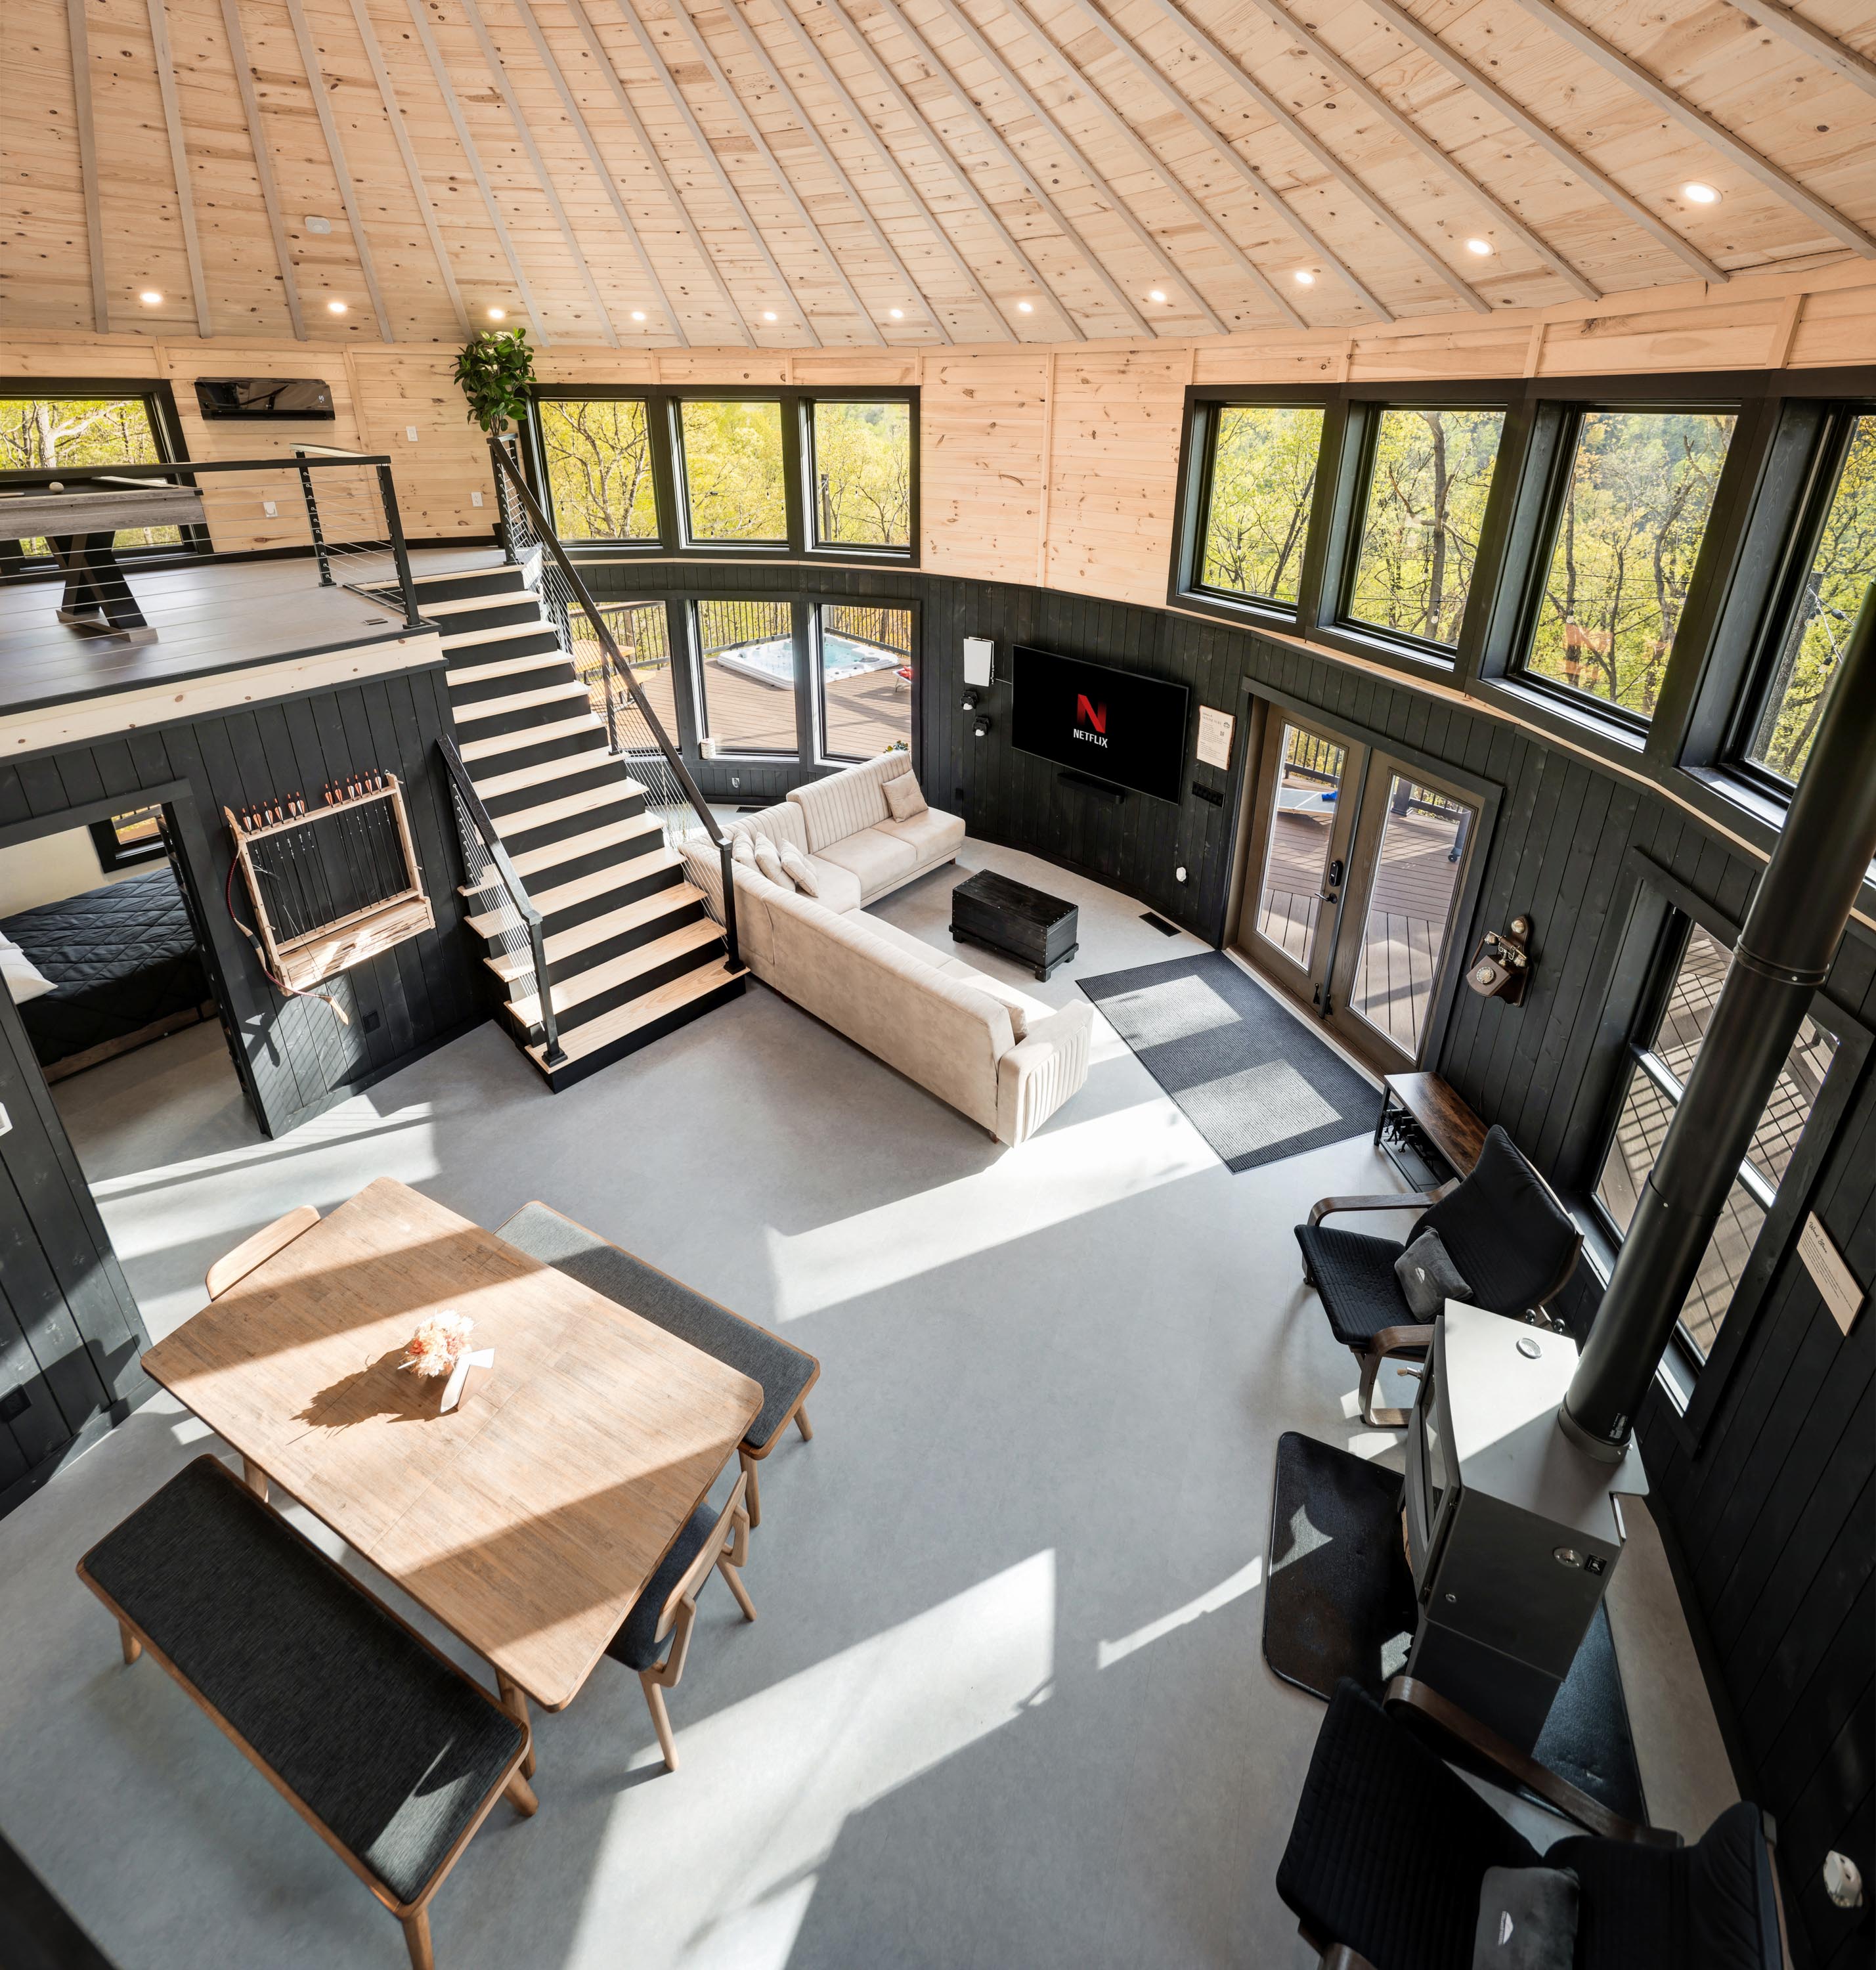 <span  class="uc_style_uc_tiles_grid_image_elementor_uc_items_attribute_title" style="color:#ffffff;">View from Loft, Dining Table, Wood Stove, Lounge Chairs, 75-inch TV, PS5, Panoramic Windows, Archery Set, Modern Interior - Skyline Yurt</span>